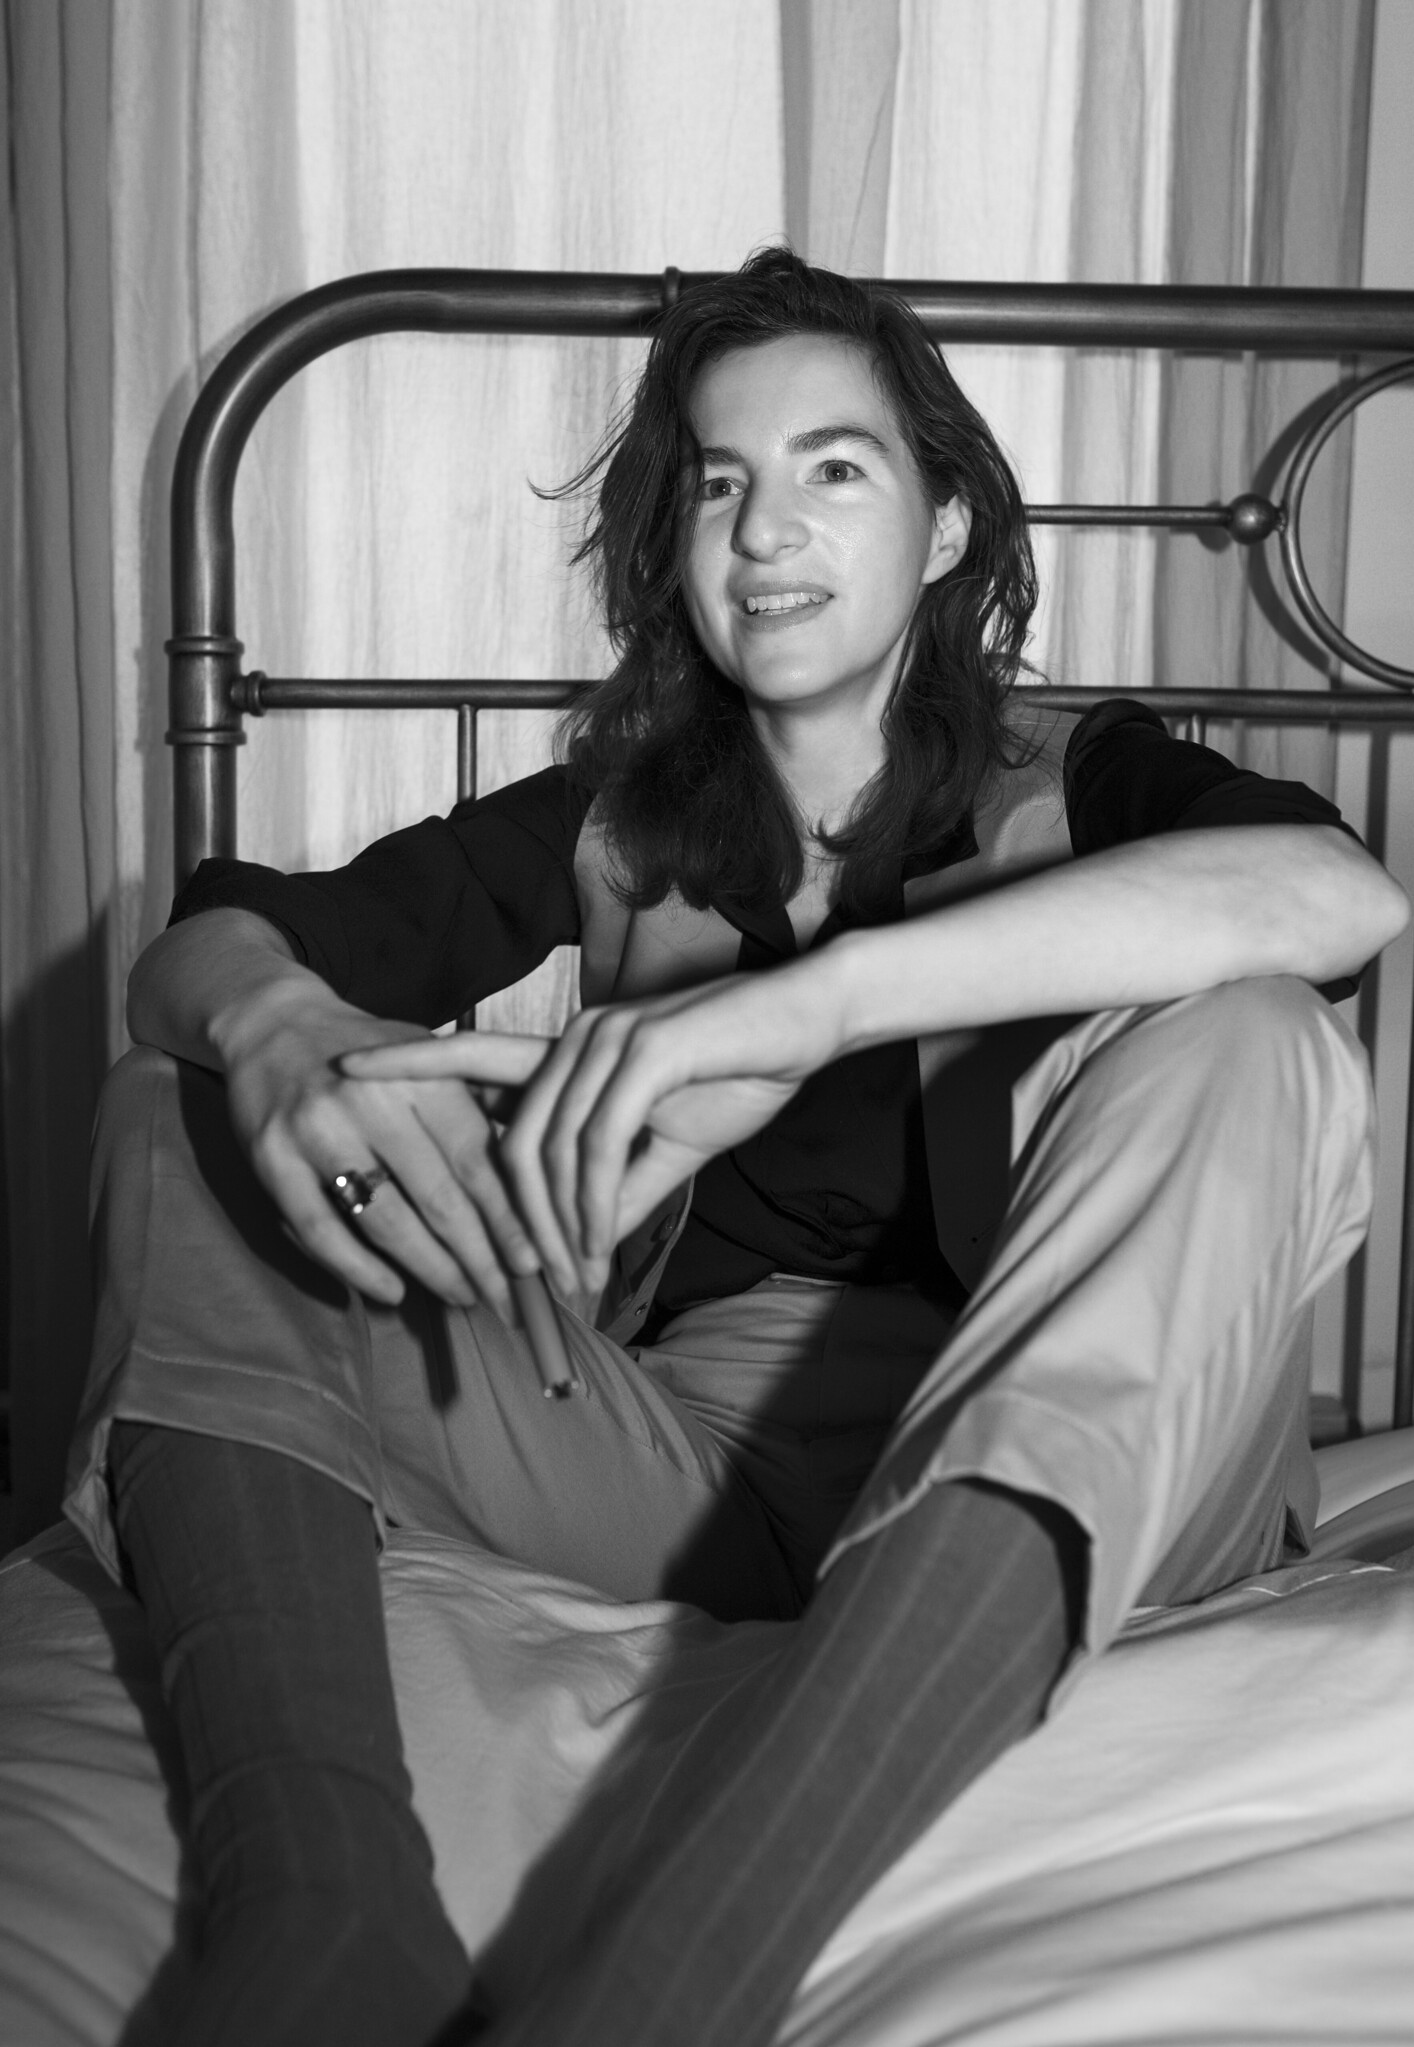 A photo of Maggie Thrash in a suit on a bed holding a pen